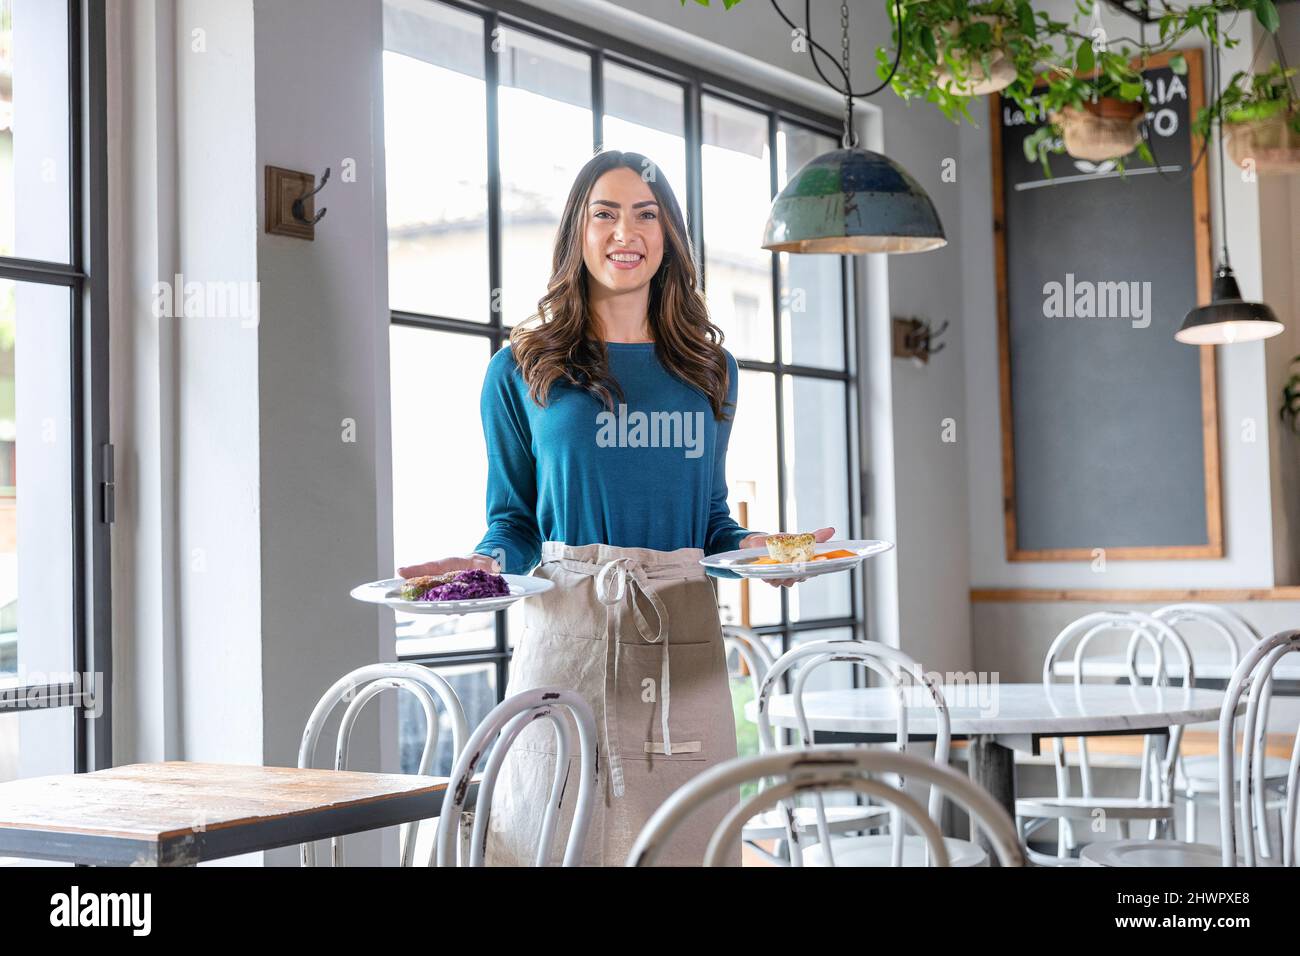 Smiling waitress with food plates working in cafe Stock Photo